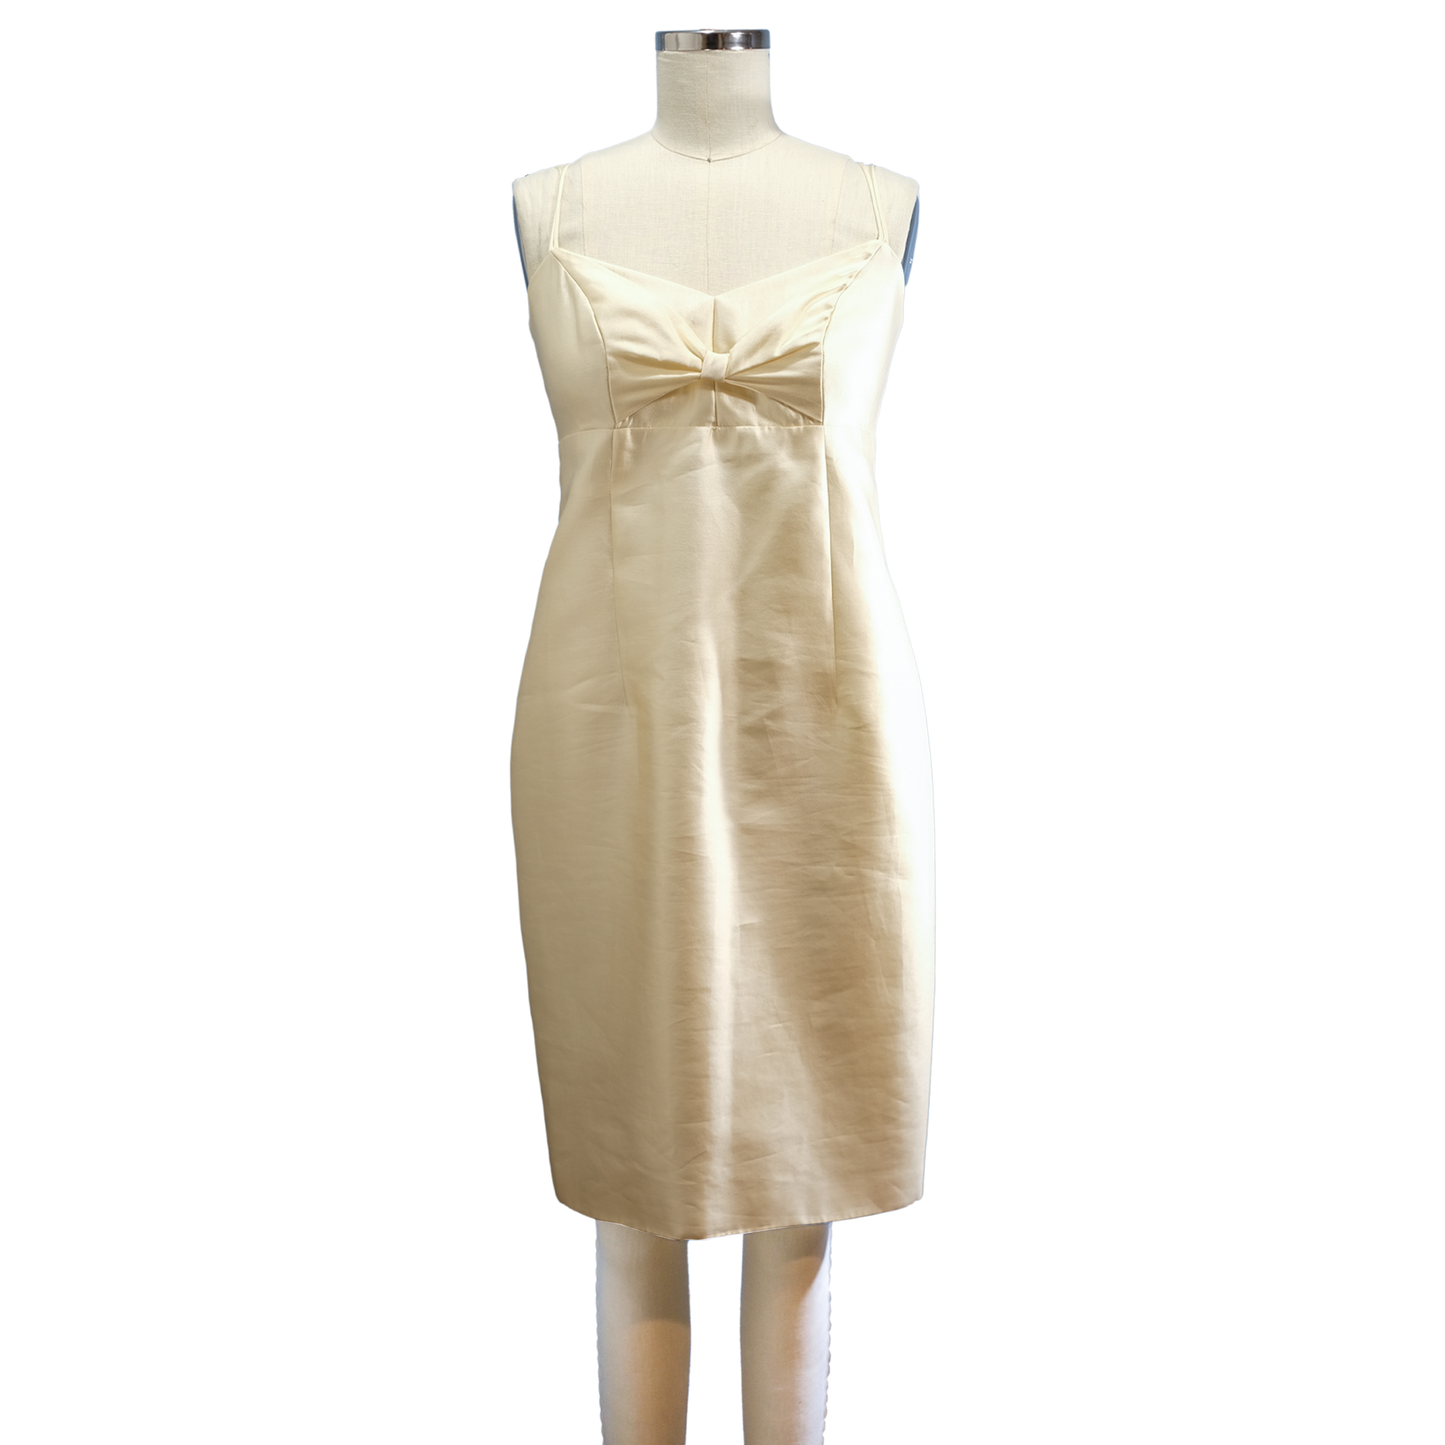 Pre-owned Hartly Westwood - Cream Silk Dress and Jacket Set - Size Medium - Pre-owned